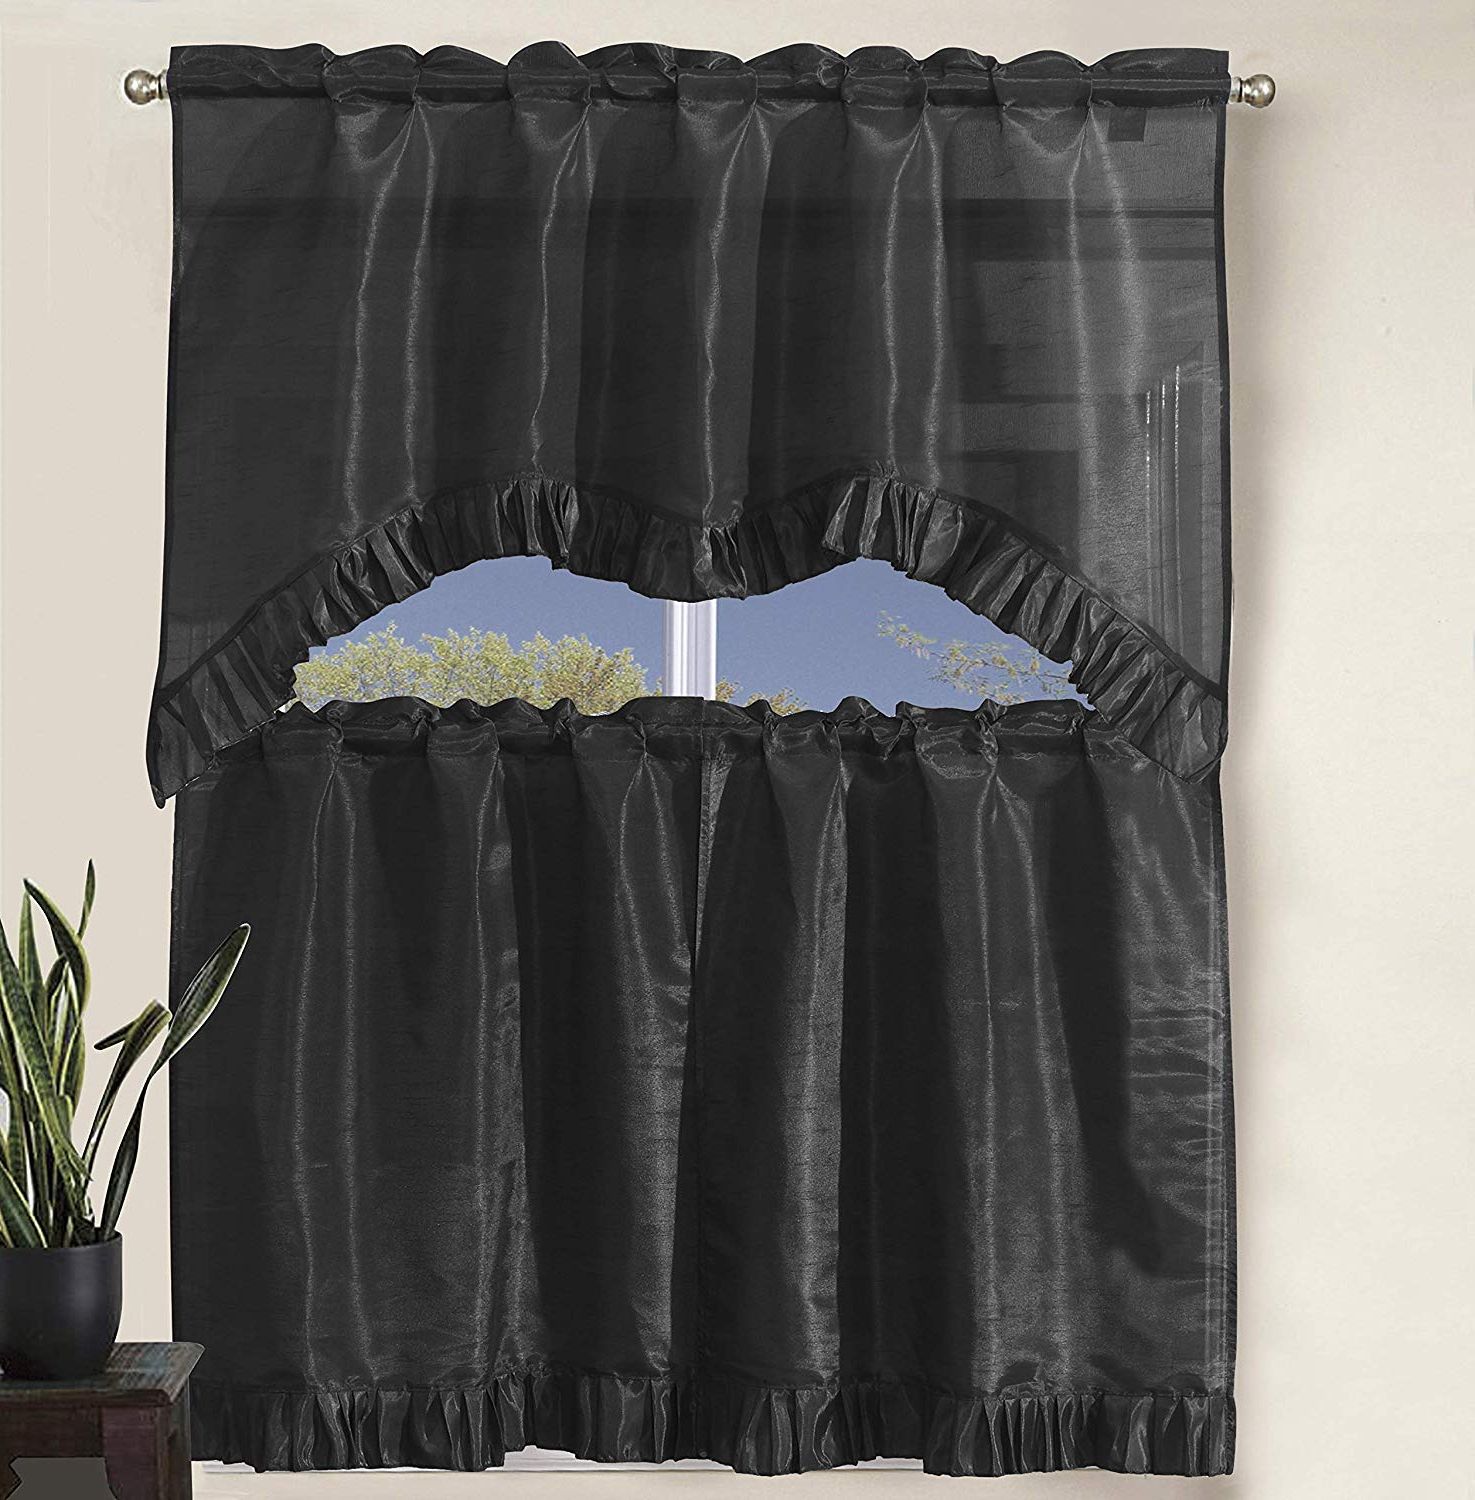 Decotex 3 Piece Pleated Ruffles Faux Silk Solid Kitchen Window Treatment  Curtain Set With Tiers And Valance (36" Tiers With Swag Valance, Chocolate) Within Most Current Faux Silk 3 Piece Kitchen Curtain Sets (View 17 of 20)